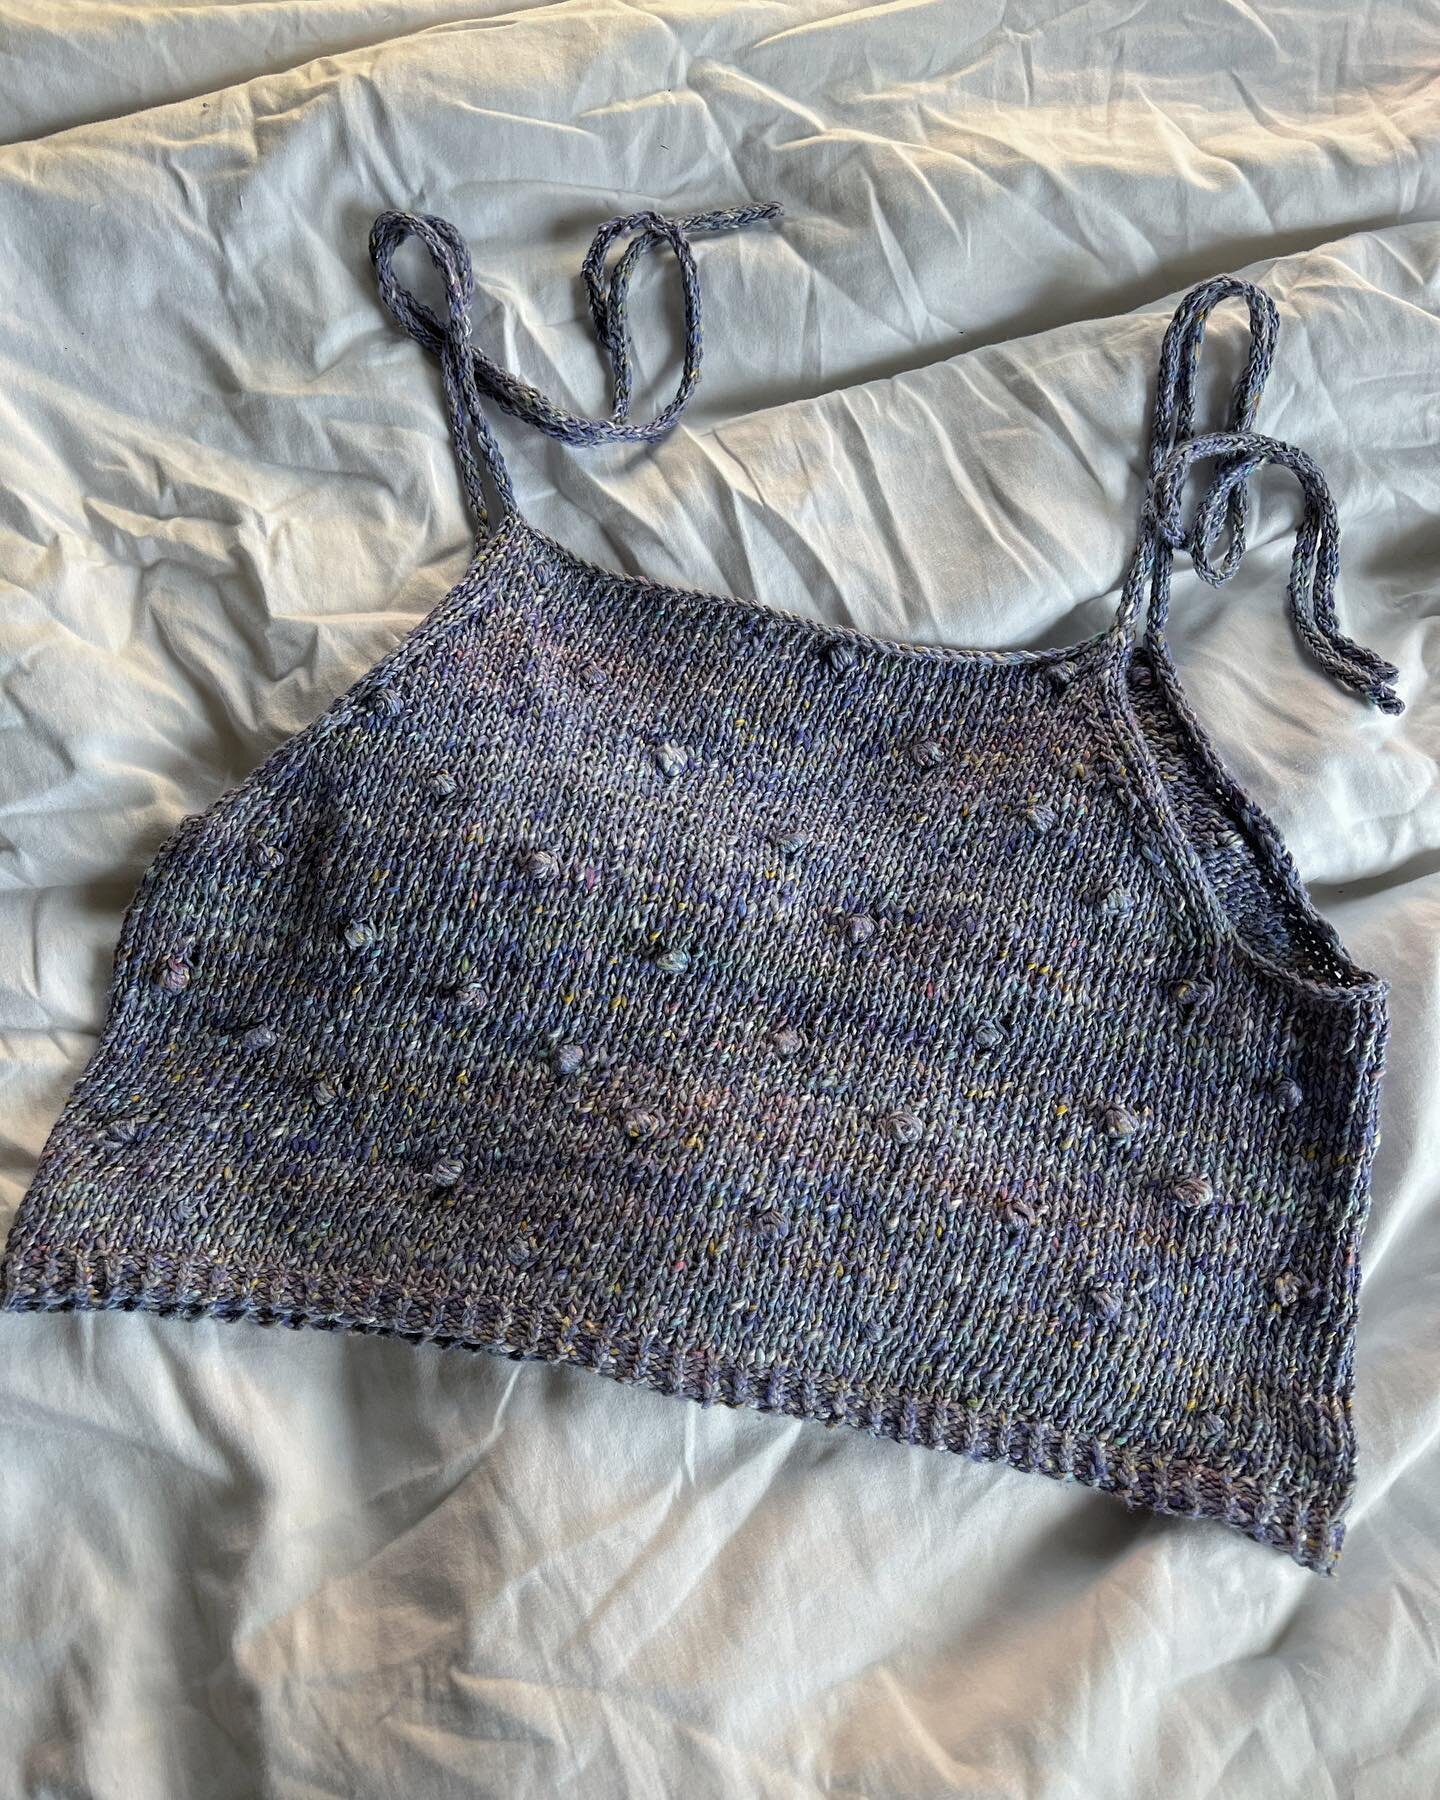 The best part of working at a yarn store is making clothes to match your coworkers 💖

Tank top is a couple patterns hacked together. It&rsquo;s knitted with @eisaku_noro cotton/silk. 

#knitting #handmade #knittersofinstagram